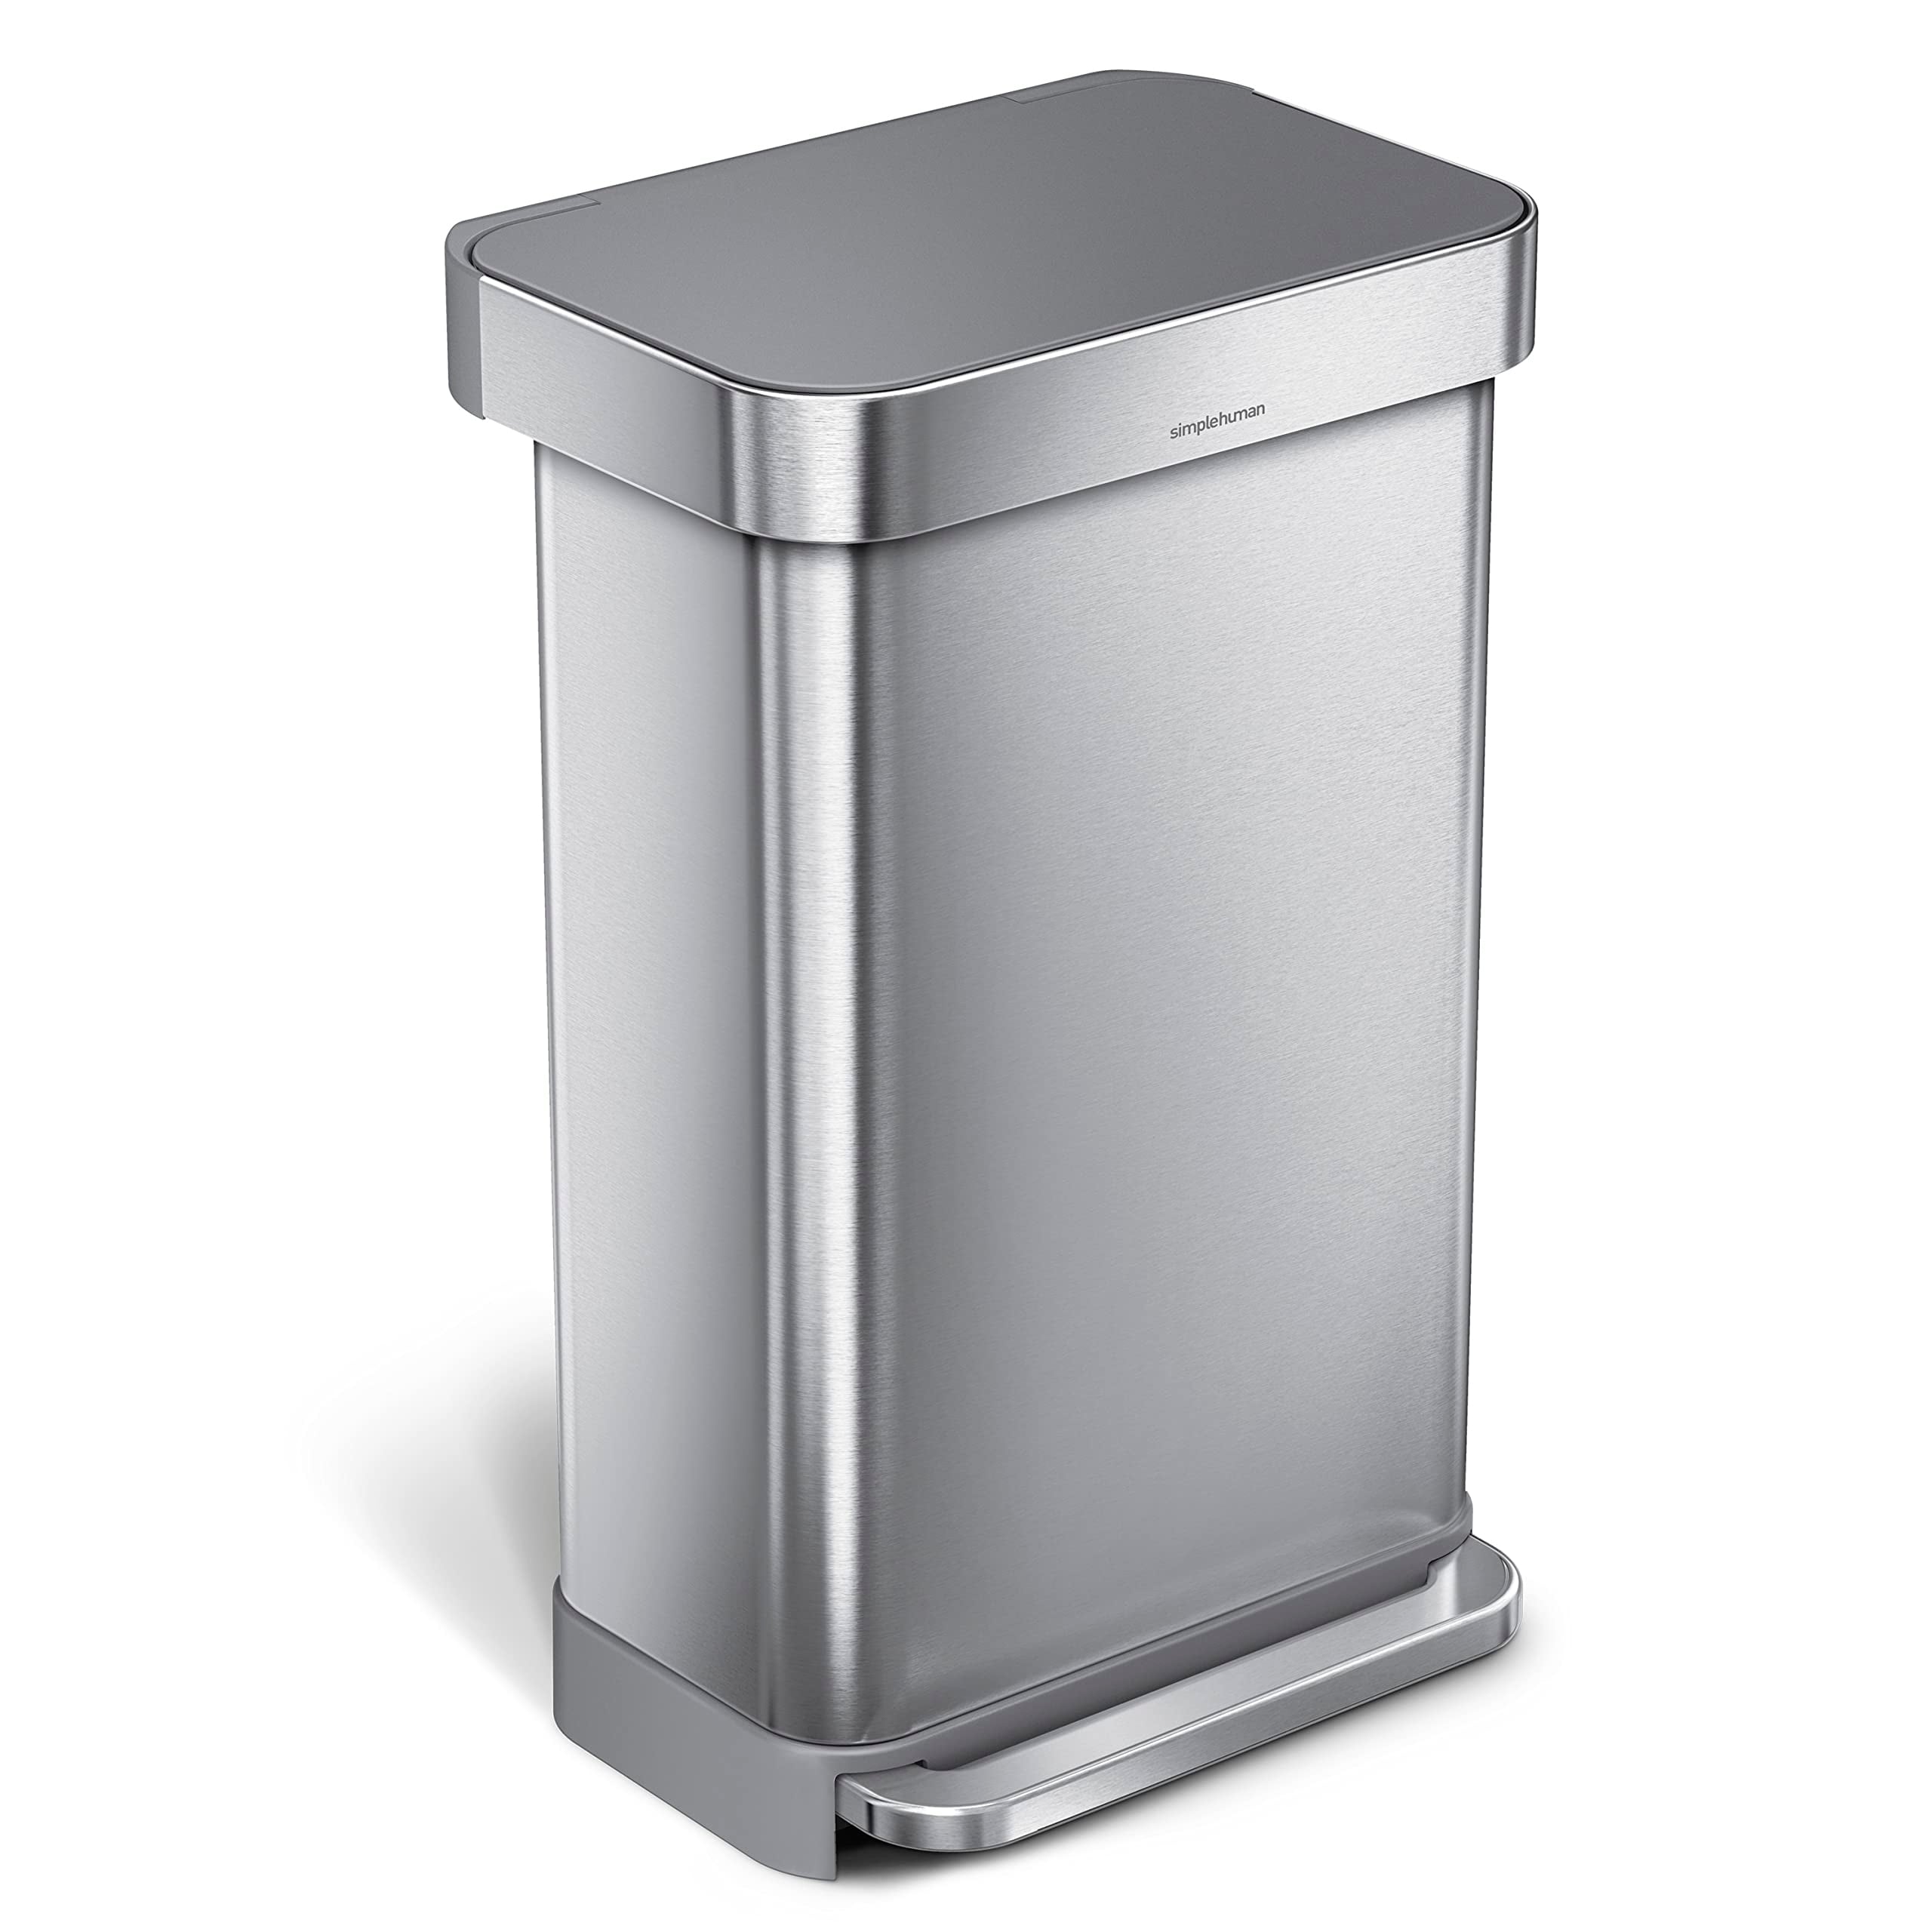 Songmics Trash Can, 12-gallon Pedal Garbage Can, Stainless Steel